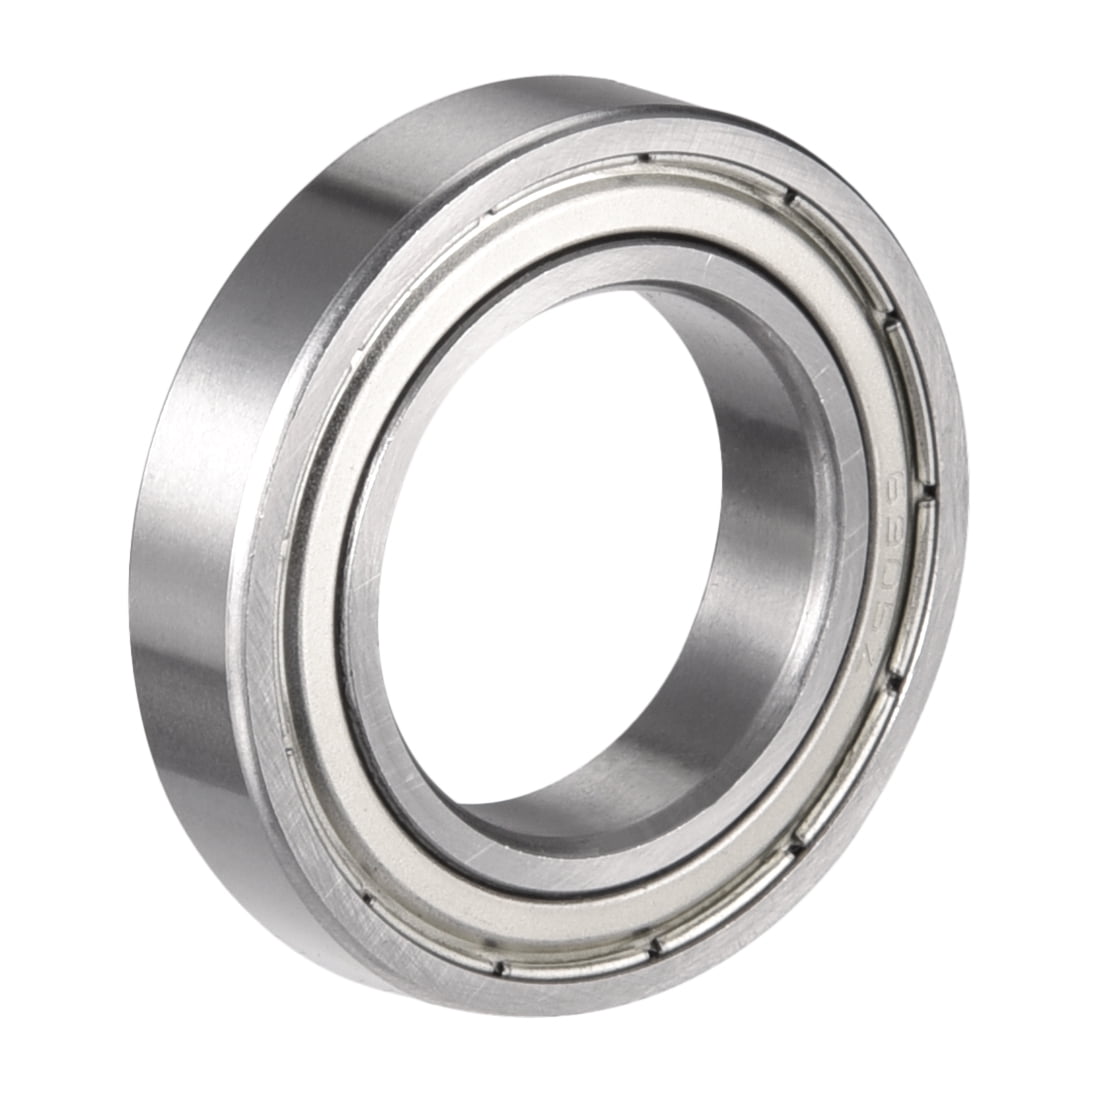 4mm x 12mm x 4mm Carbon Steel Bearings sourcing map 604ZZ Deep Groove Ball Bearing Double Shield 604-2Z 80014 Pack of 10